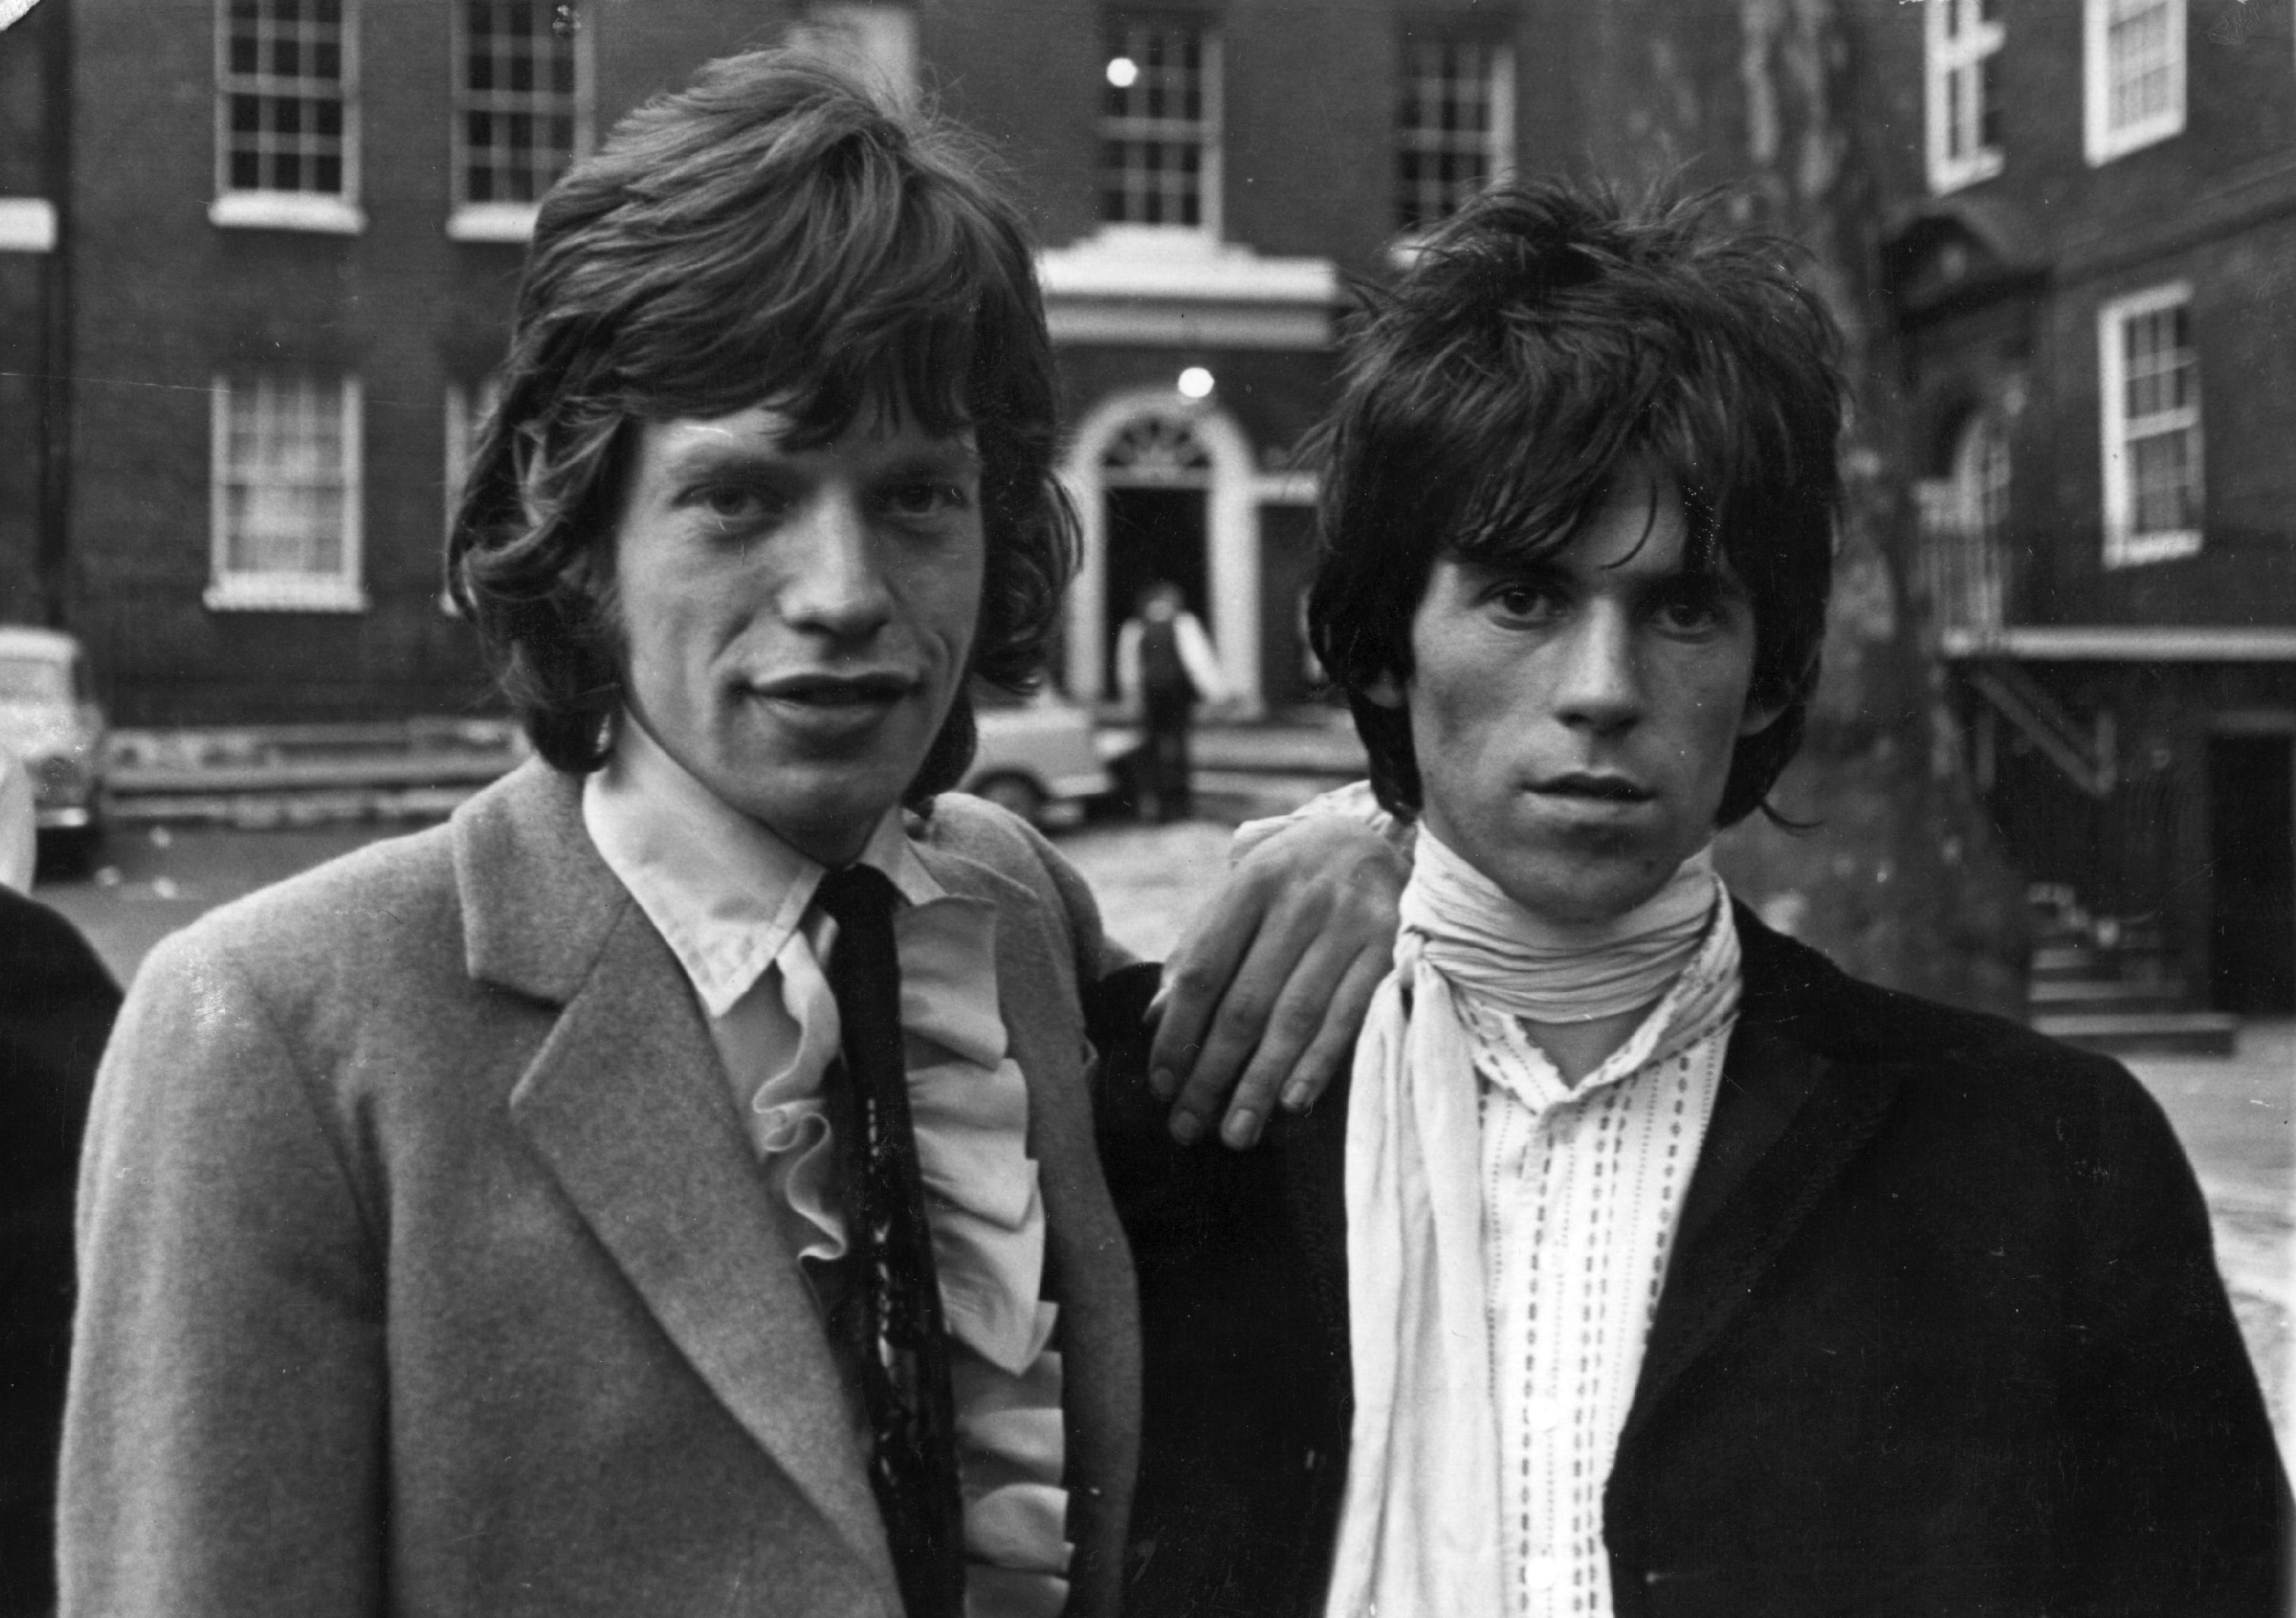 The Rolling Stones' Mick Jagger putting his arm on Keith Richards' shoulder